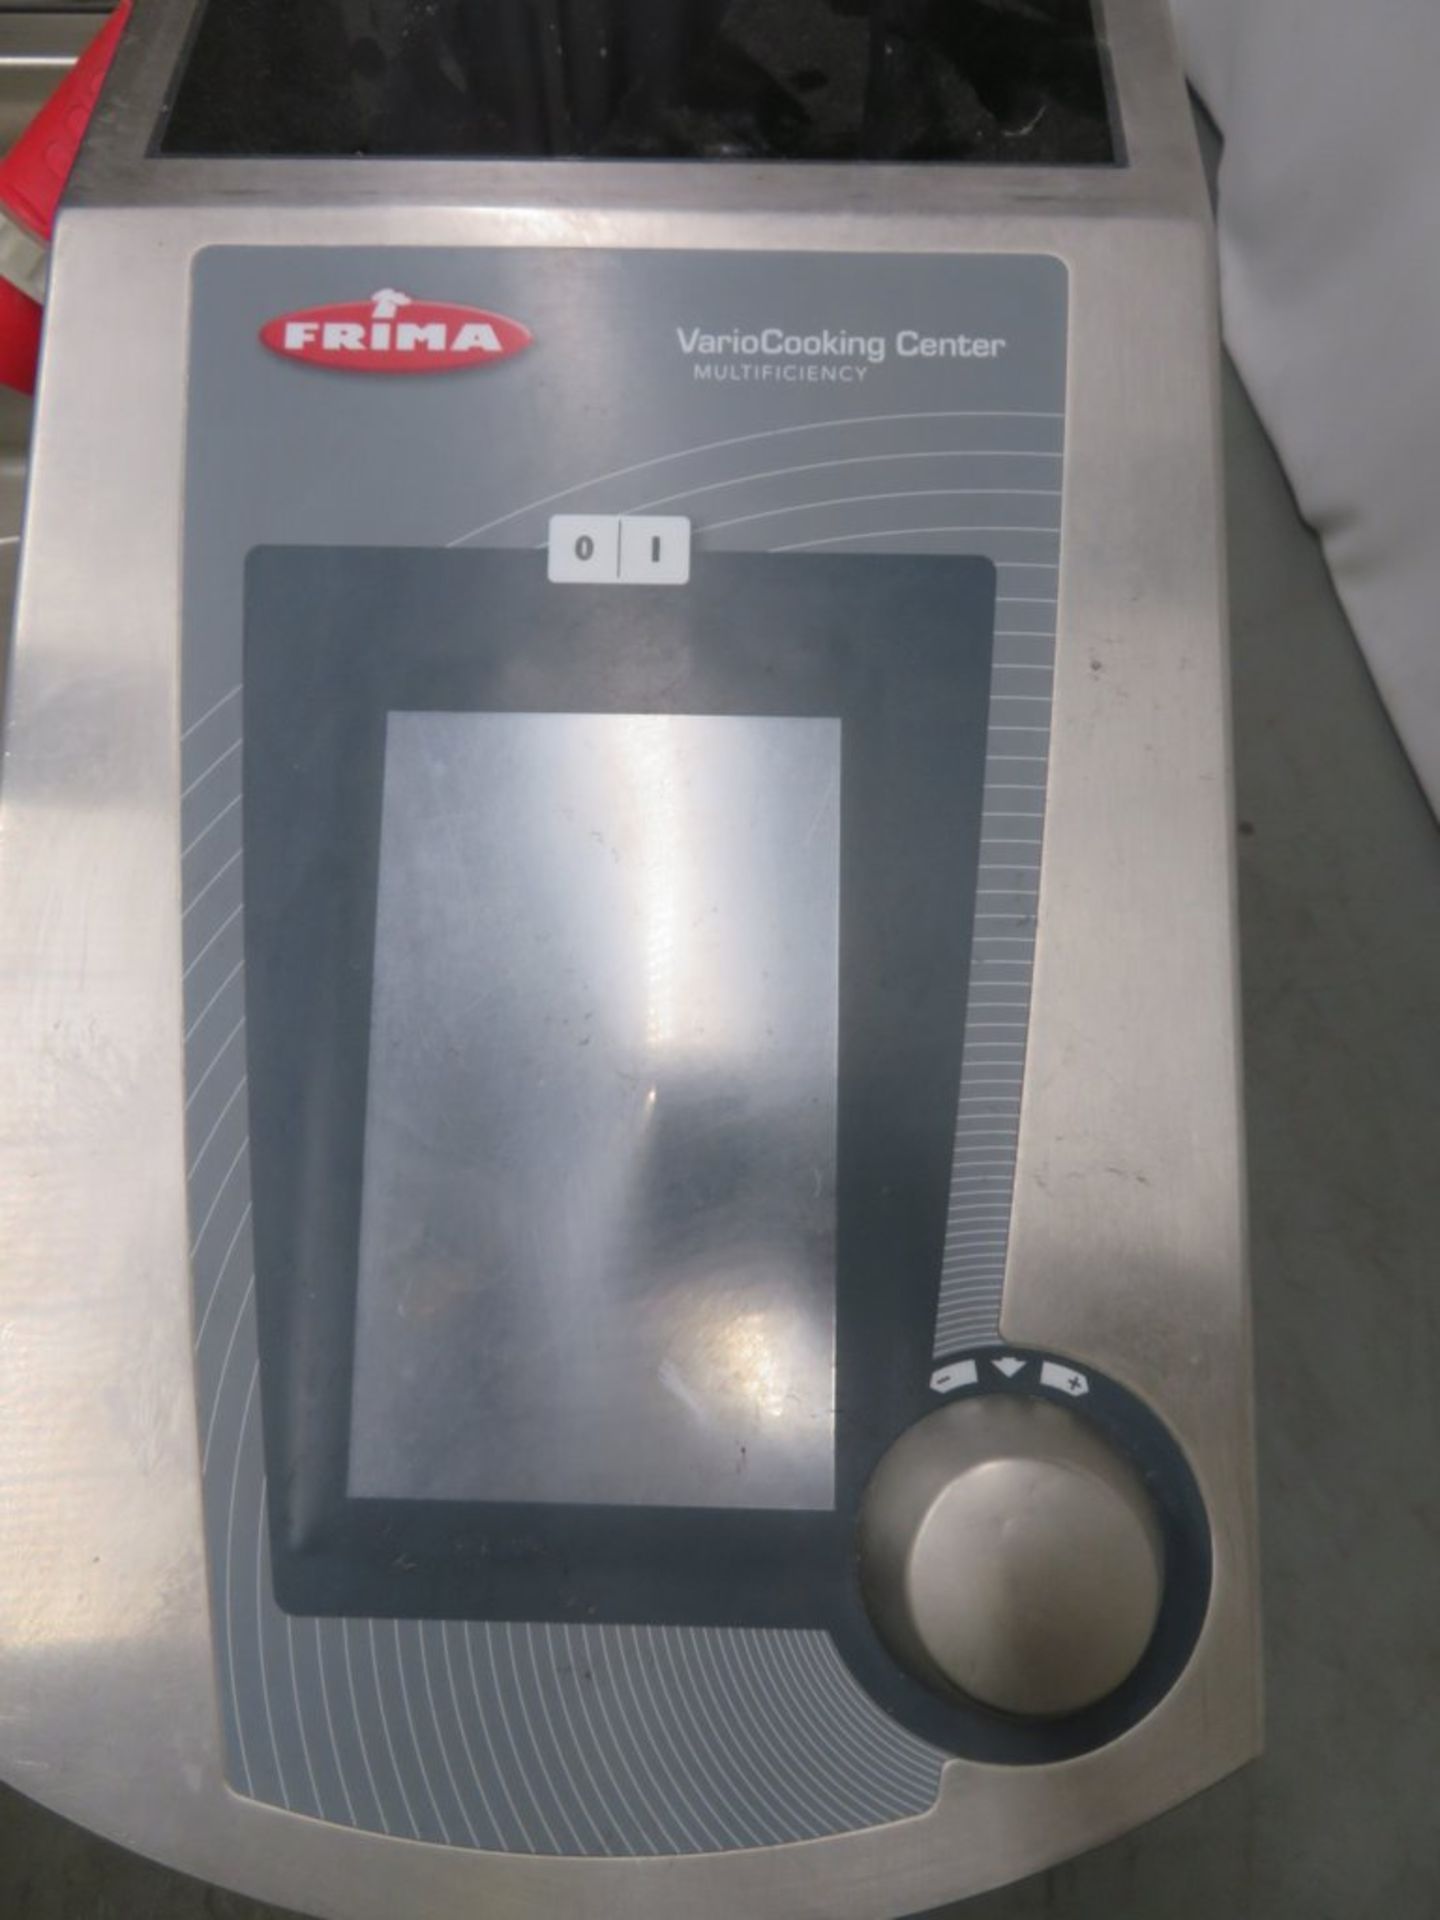 Rational Frima VarioCookingCenter VCC 311+, 3 phase electric, 150 litre capacity, boiling, - Image 5 of 9